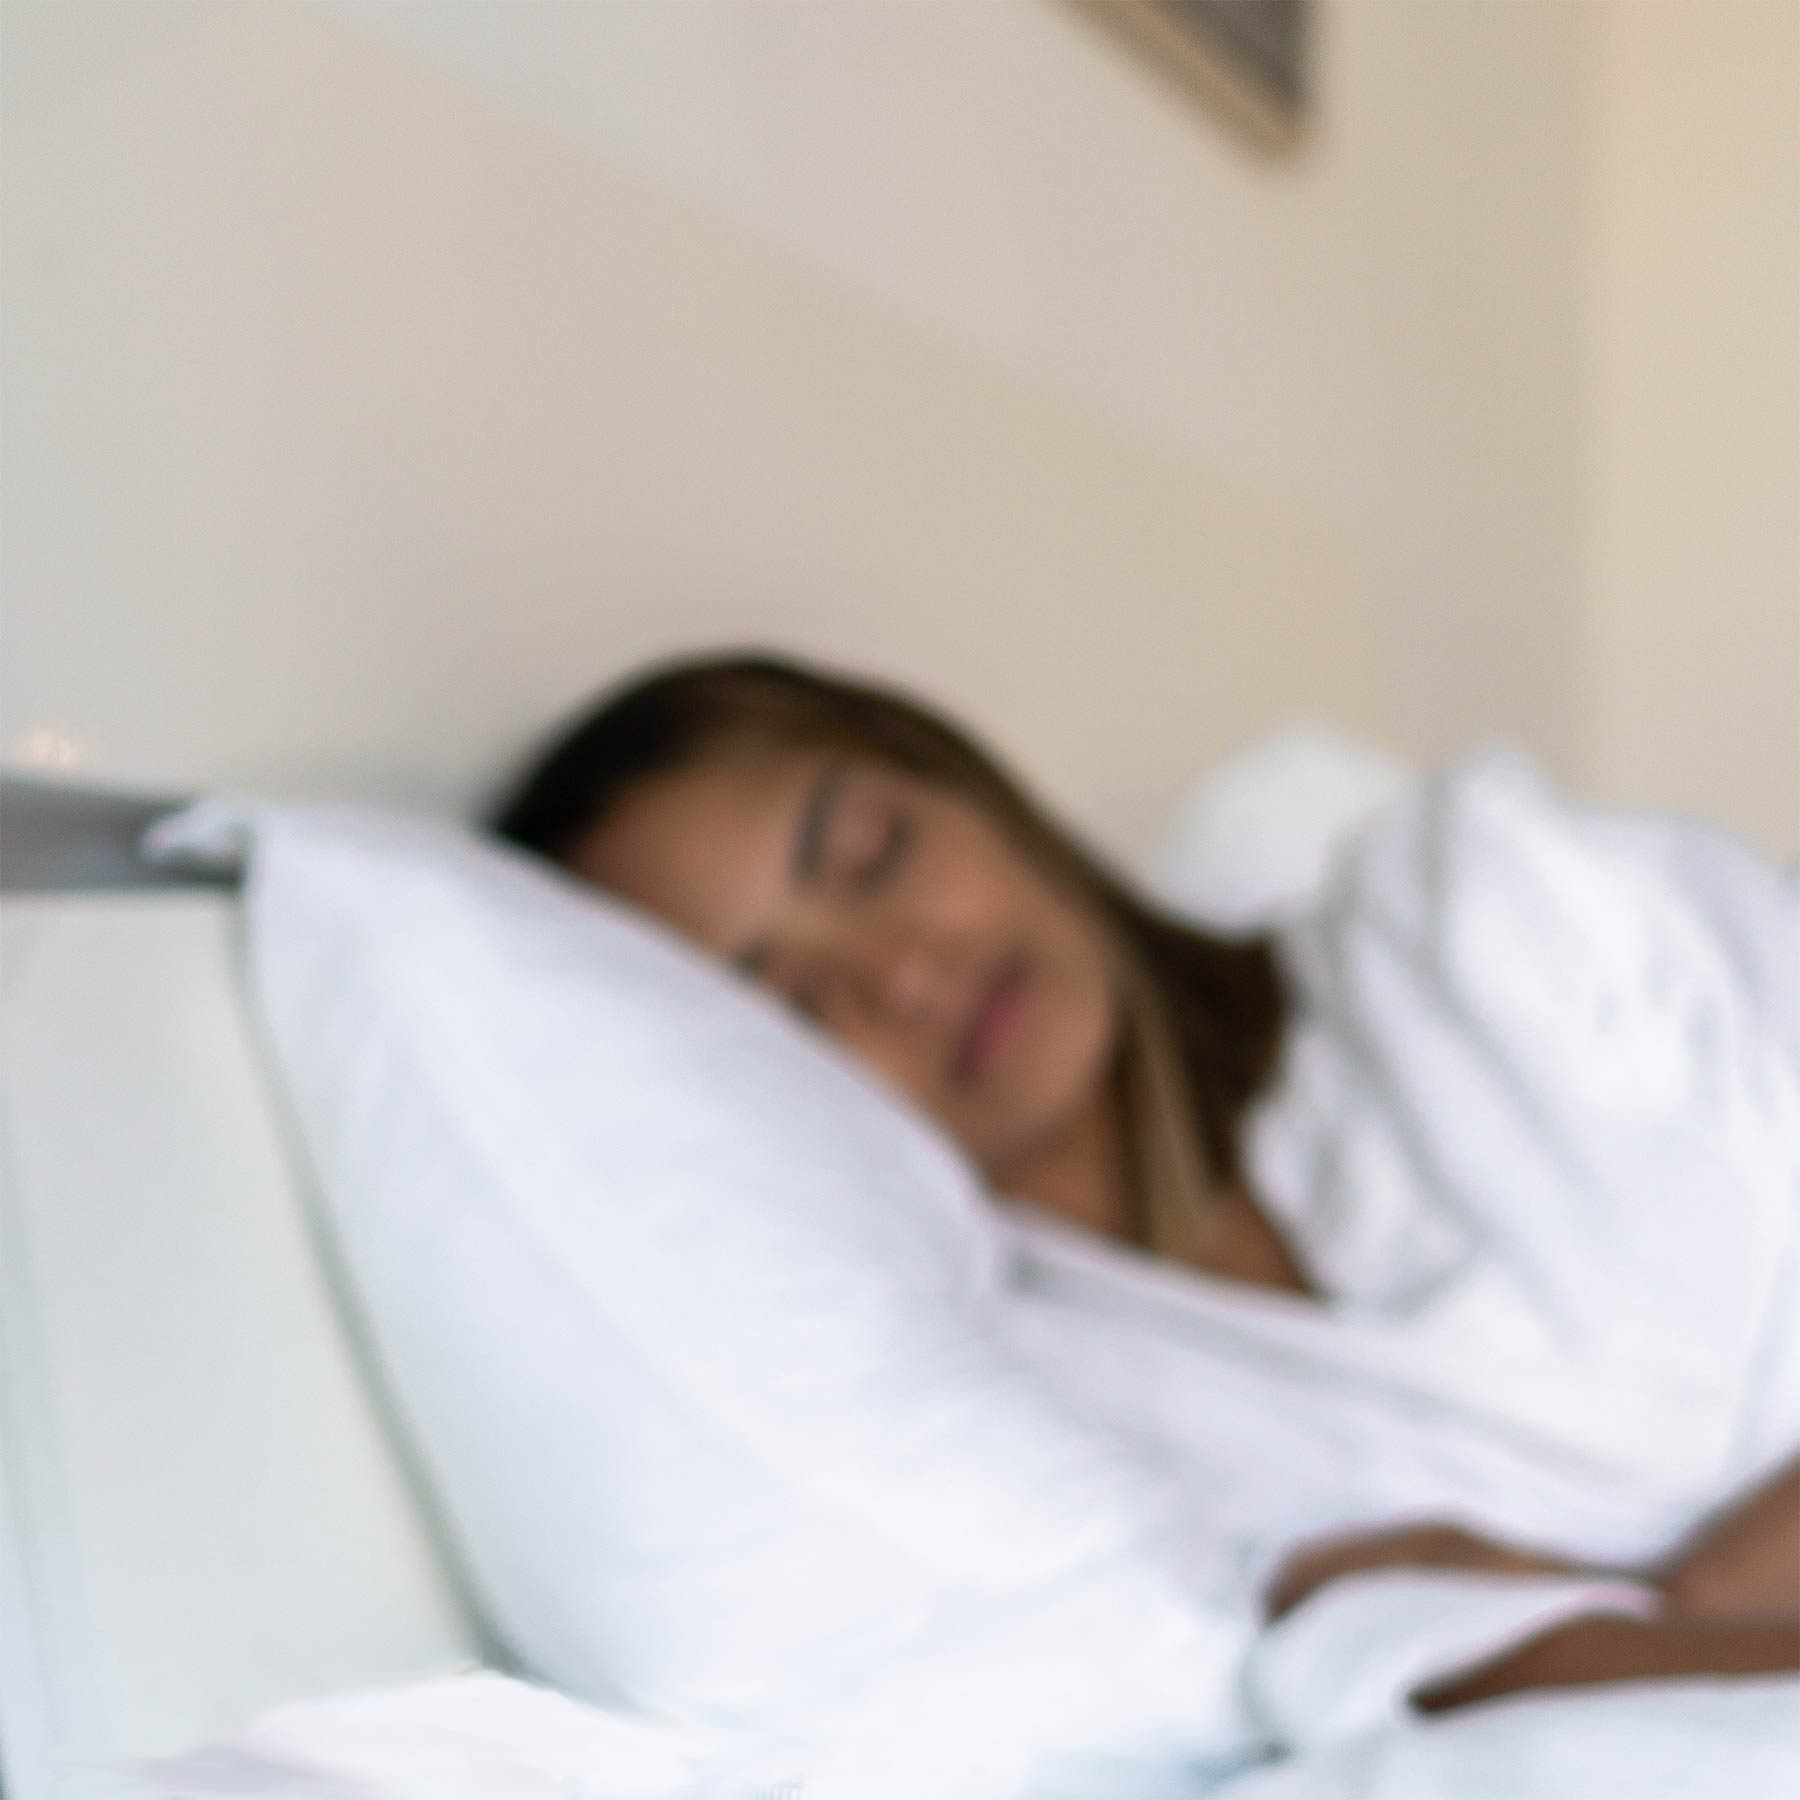 Image of woman sleeping in bed on her side facing the camera, looking restful.